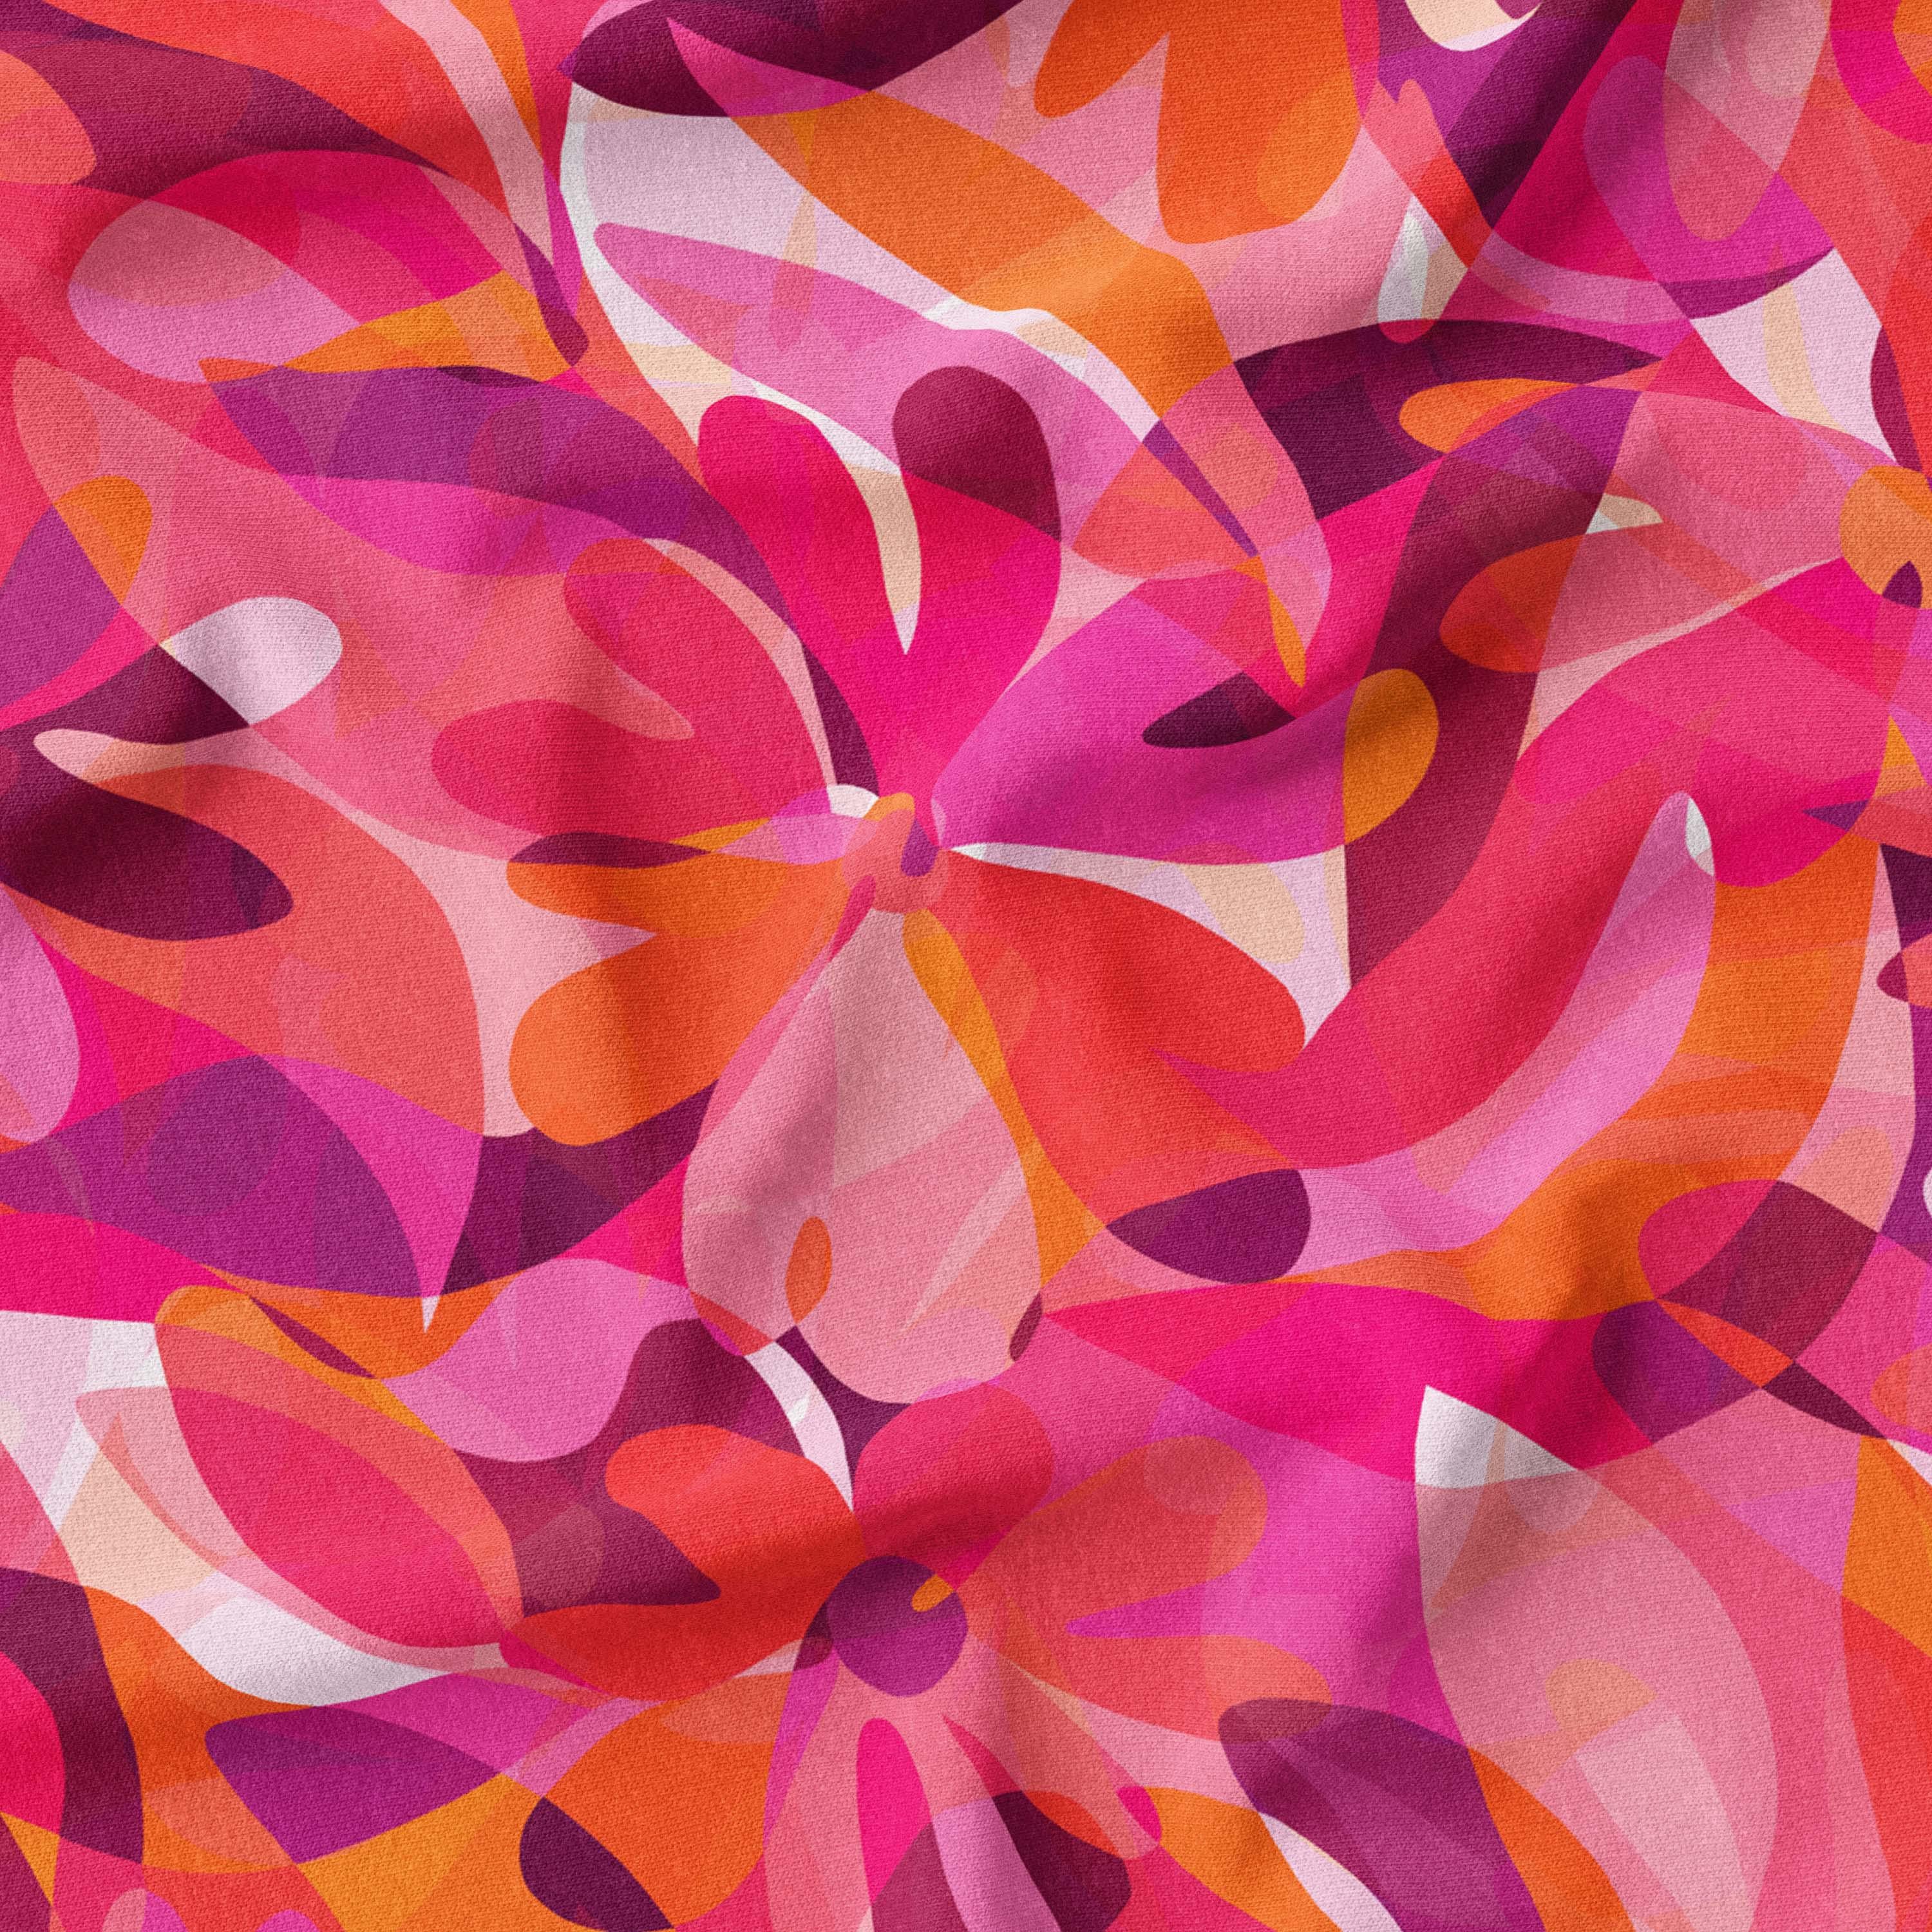 Rachel Parker's Vibrant Fabric Collection, Women's Sewing